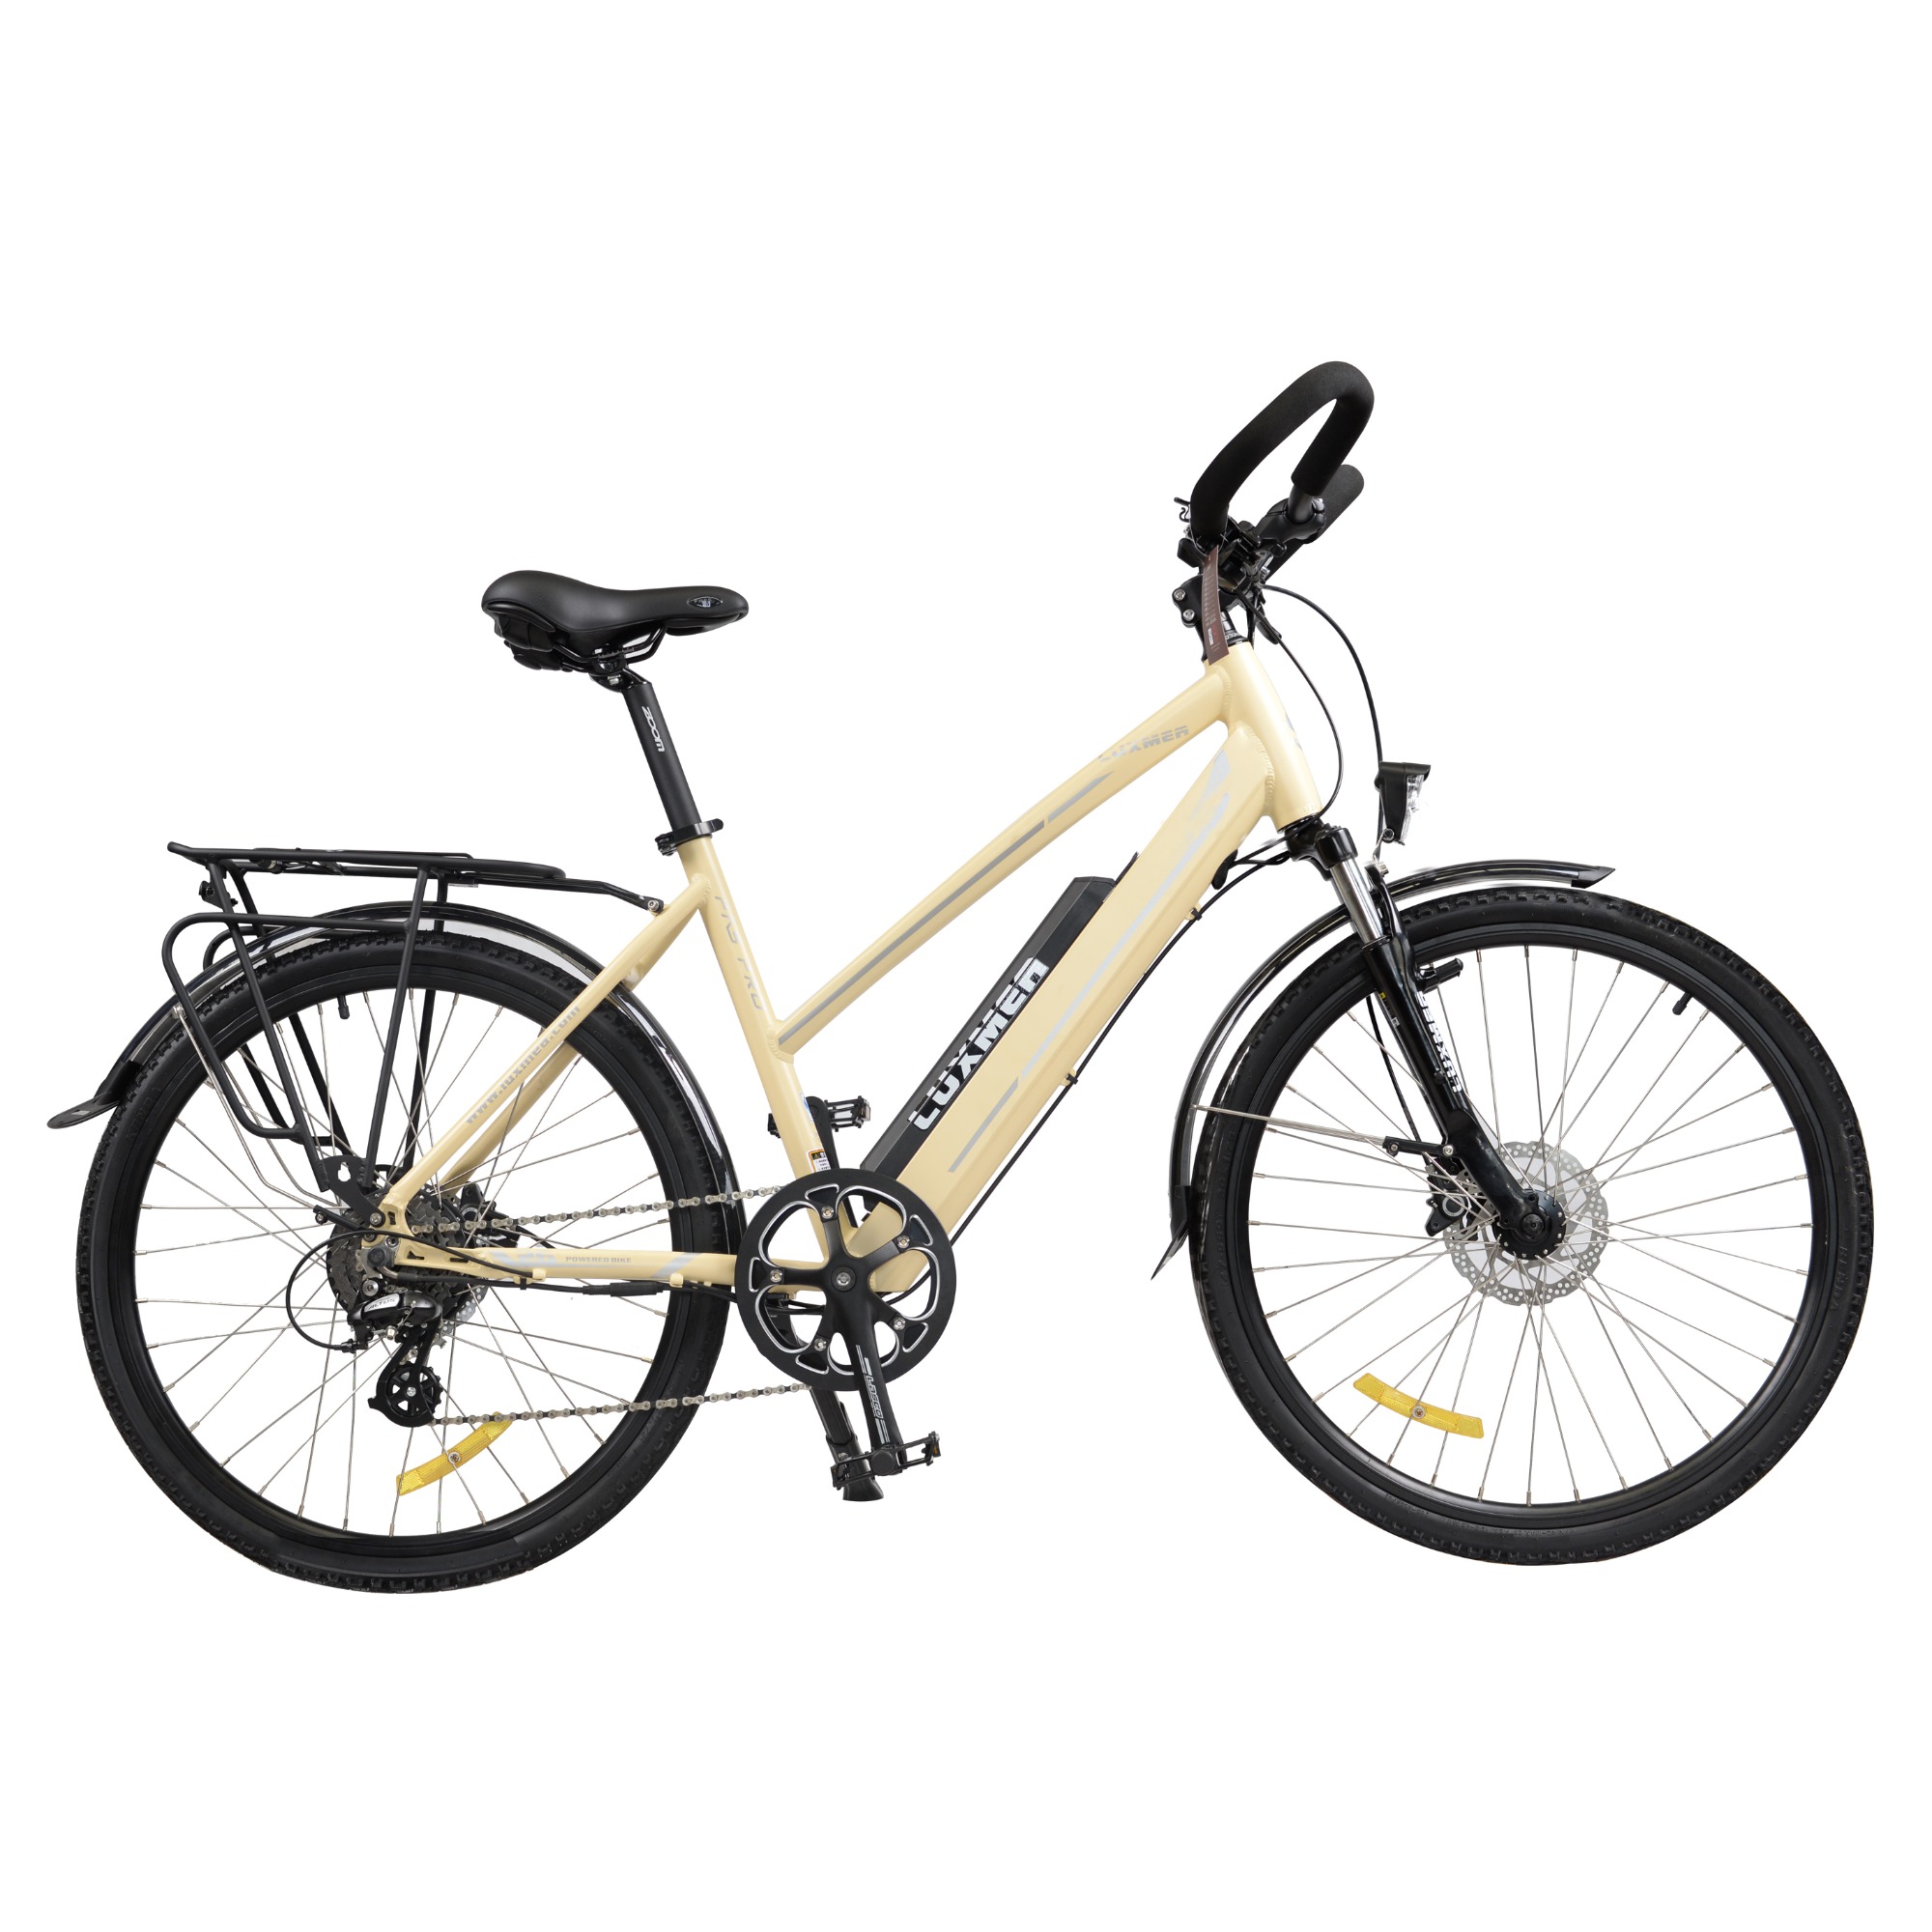 8 Benefits Of Using Electric Bikes